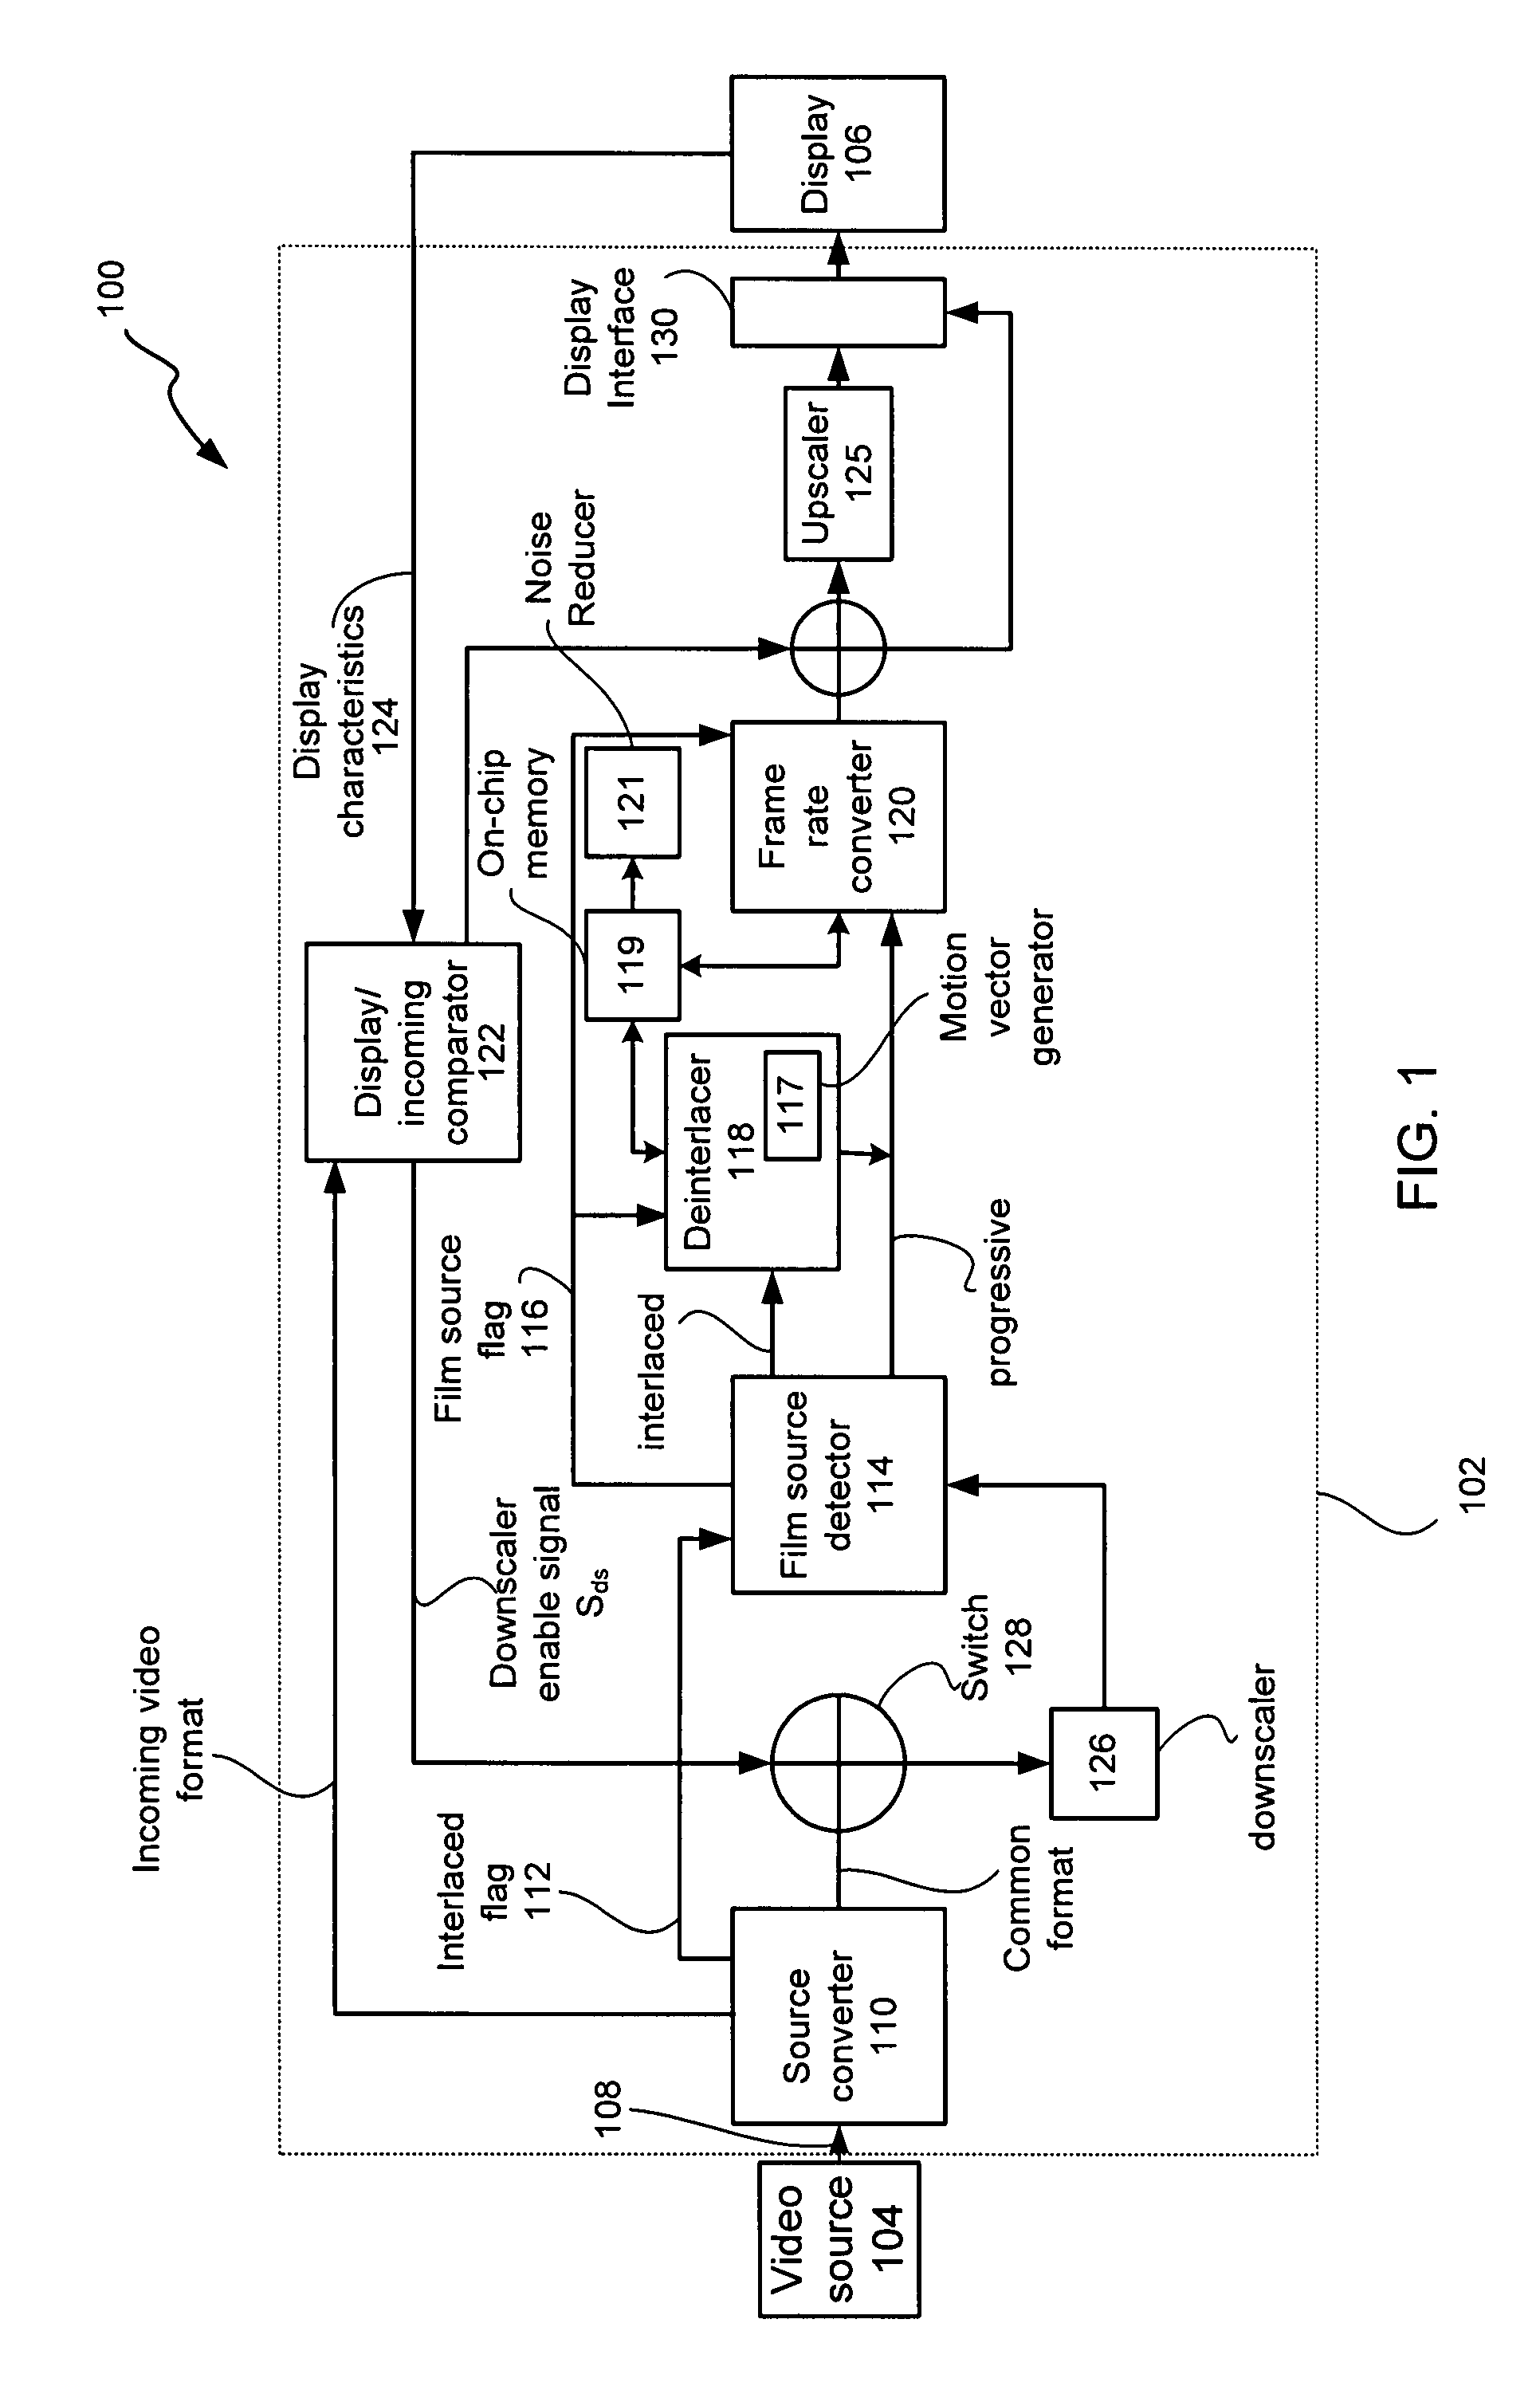 Single chip multi-function display controller and method of use thereof